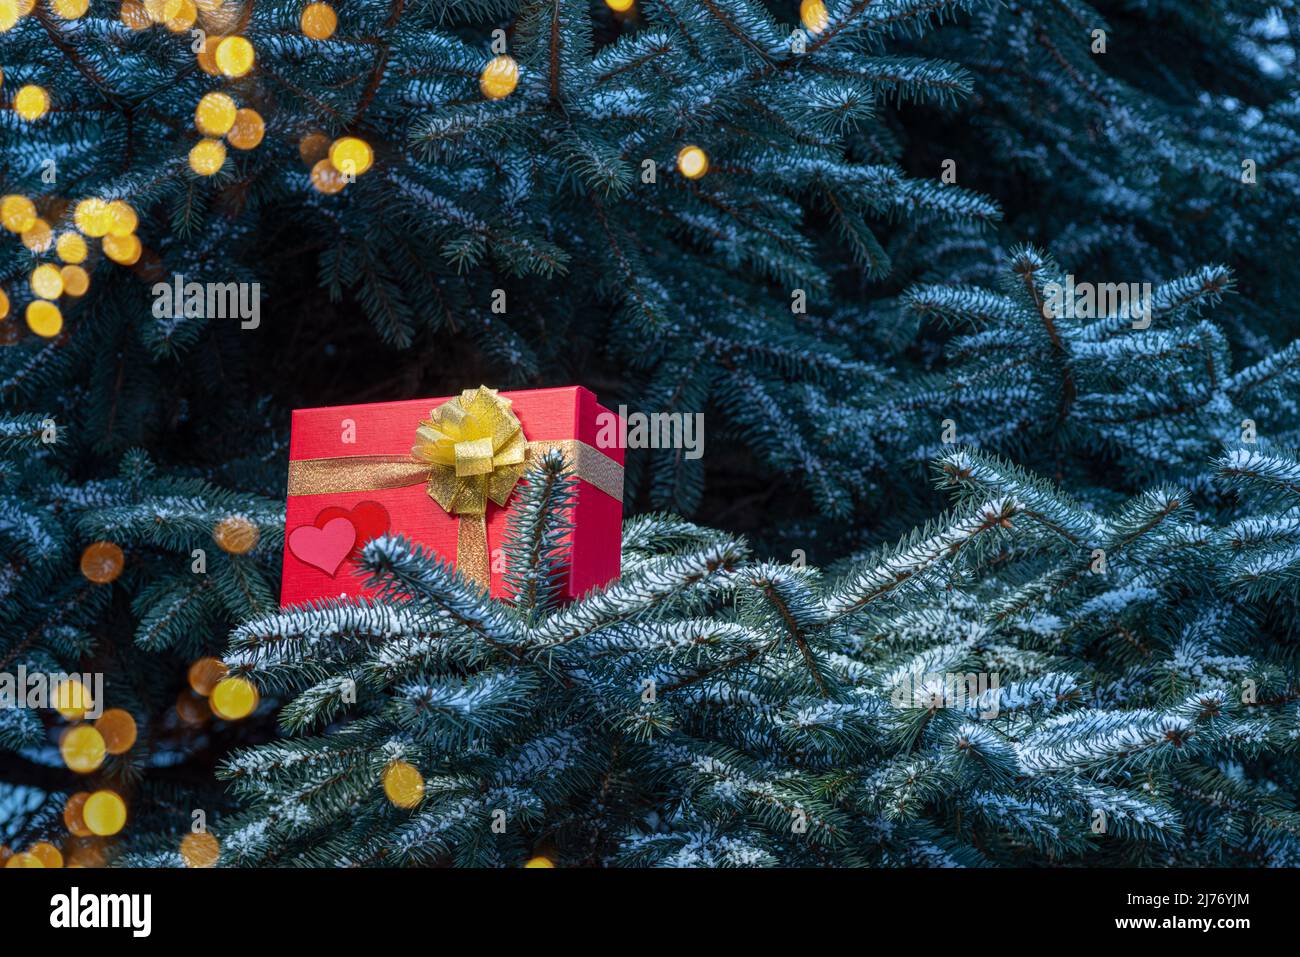 Red box-gift for Valentine's Day with hearts on fir branches. Stock Photo